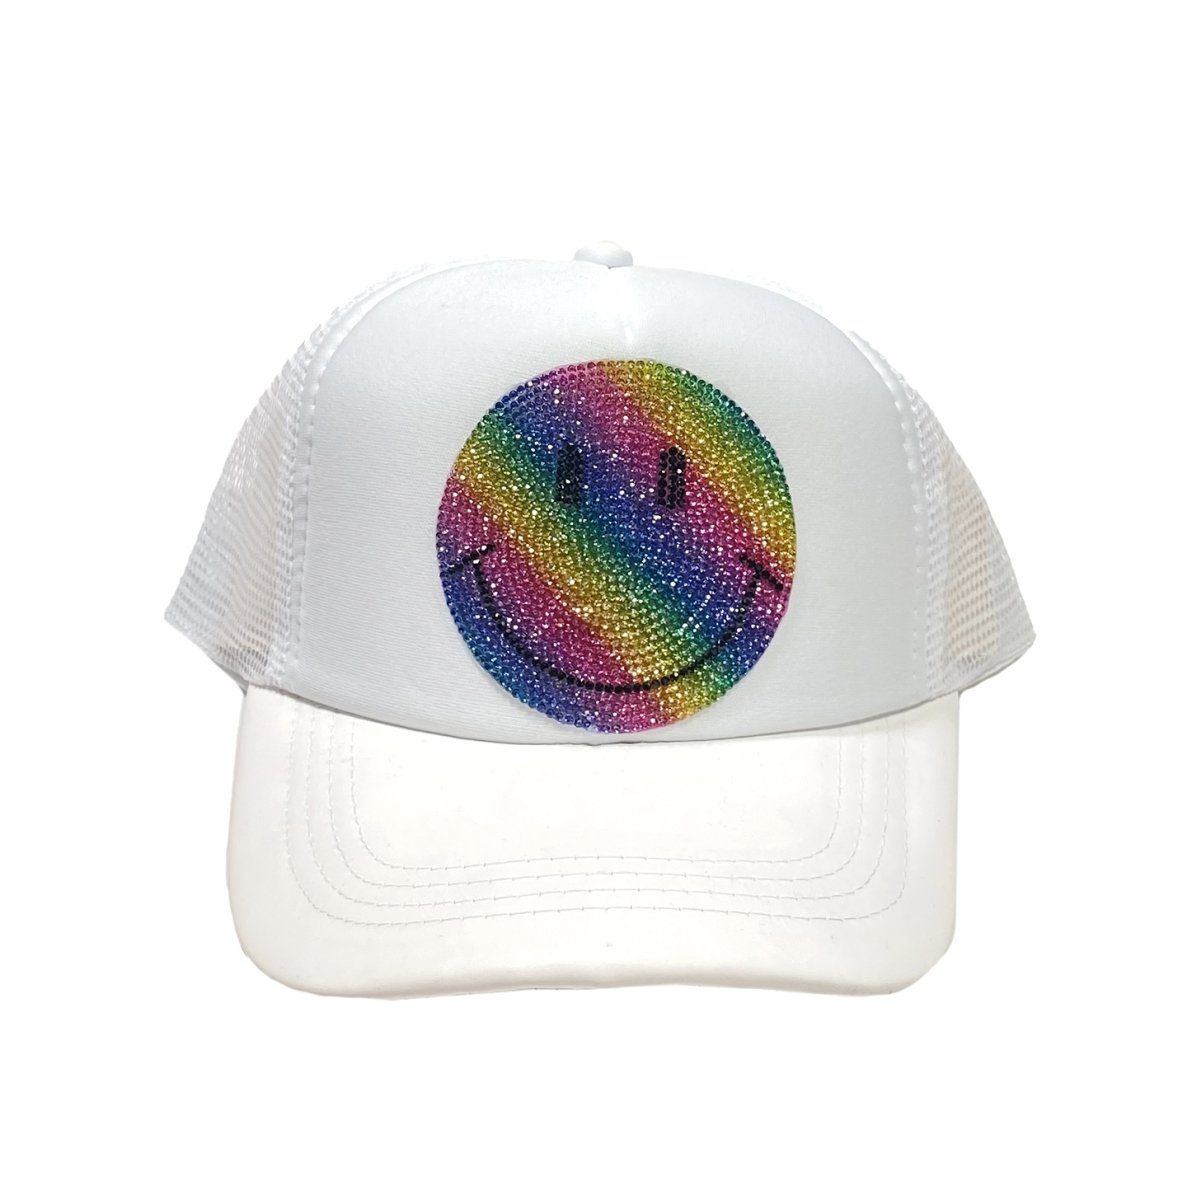 RAINBOW CRYSTAL HAPPY FACE HAT CHANGES COLOR IN SUN - HATS